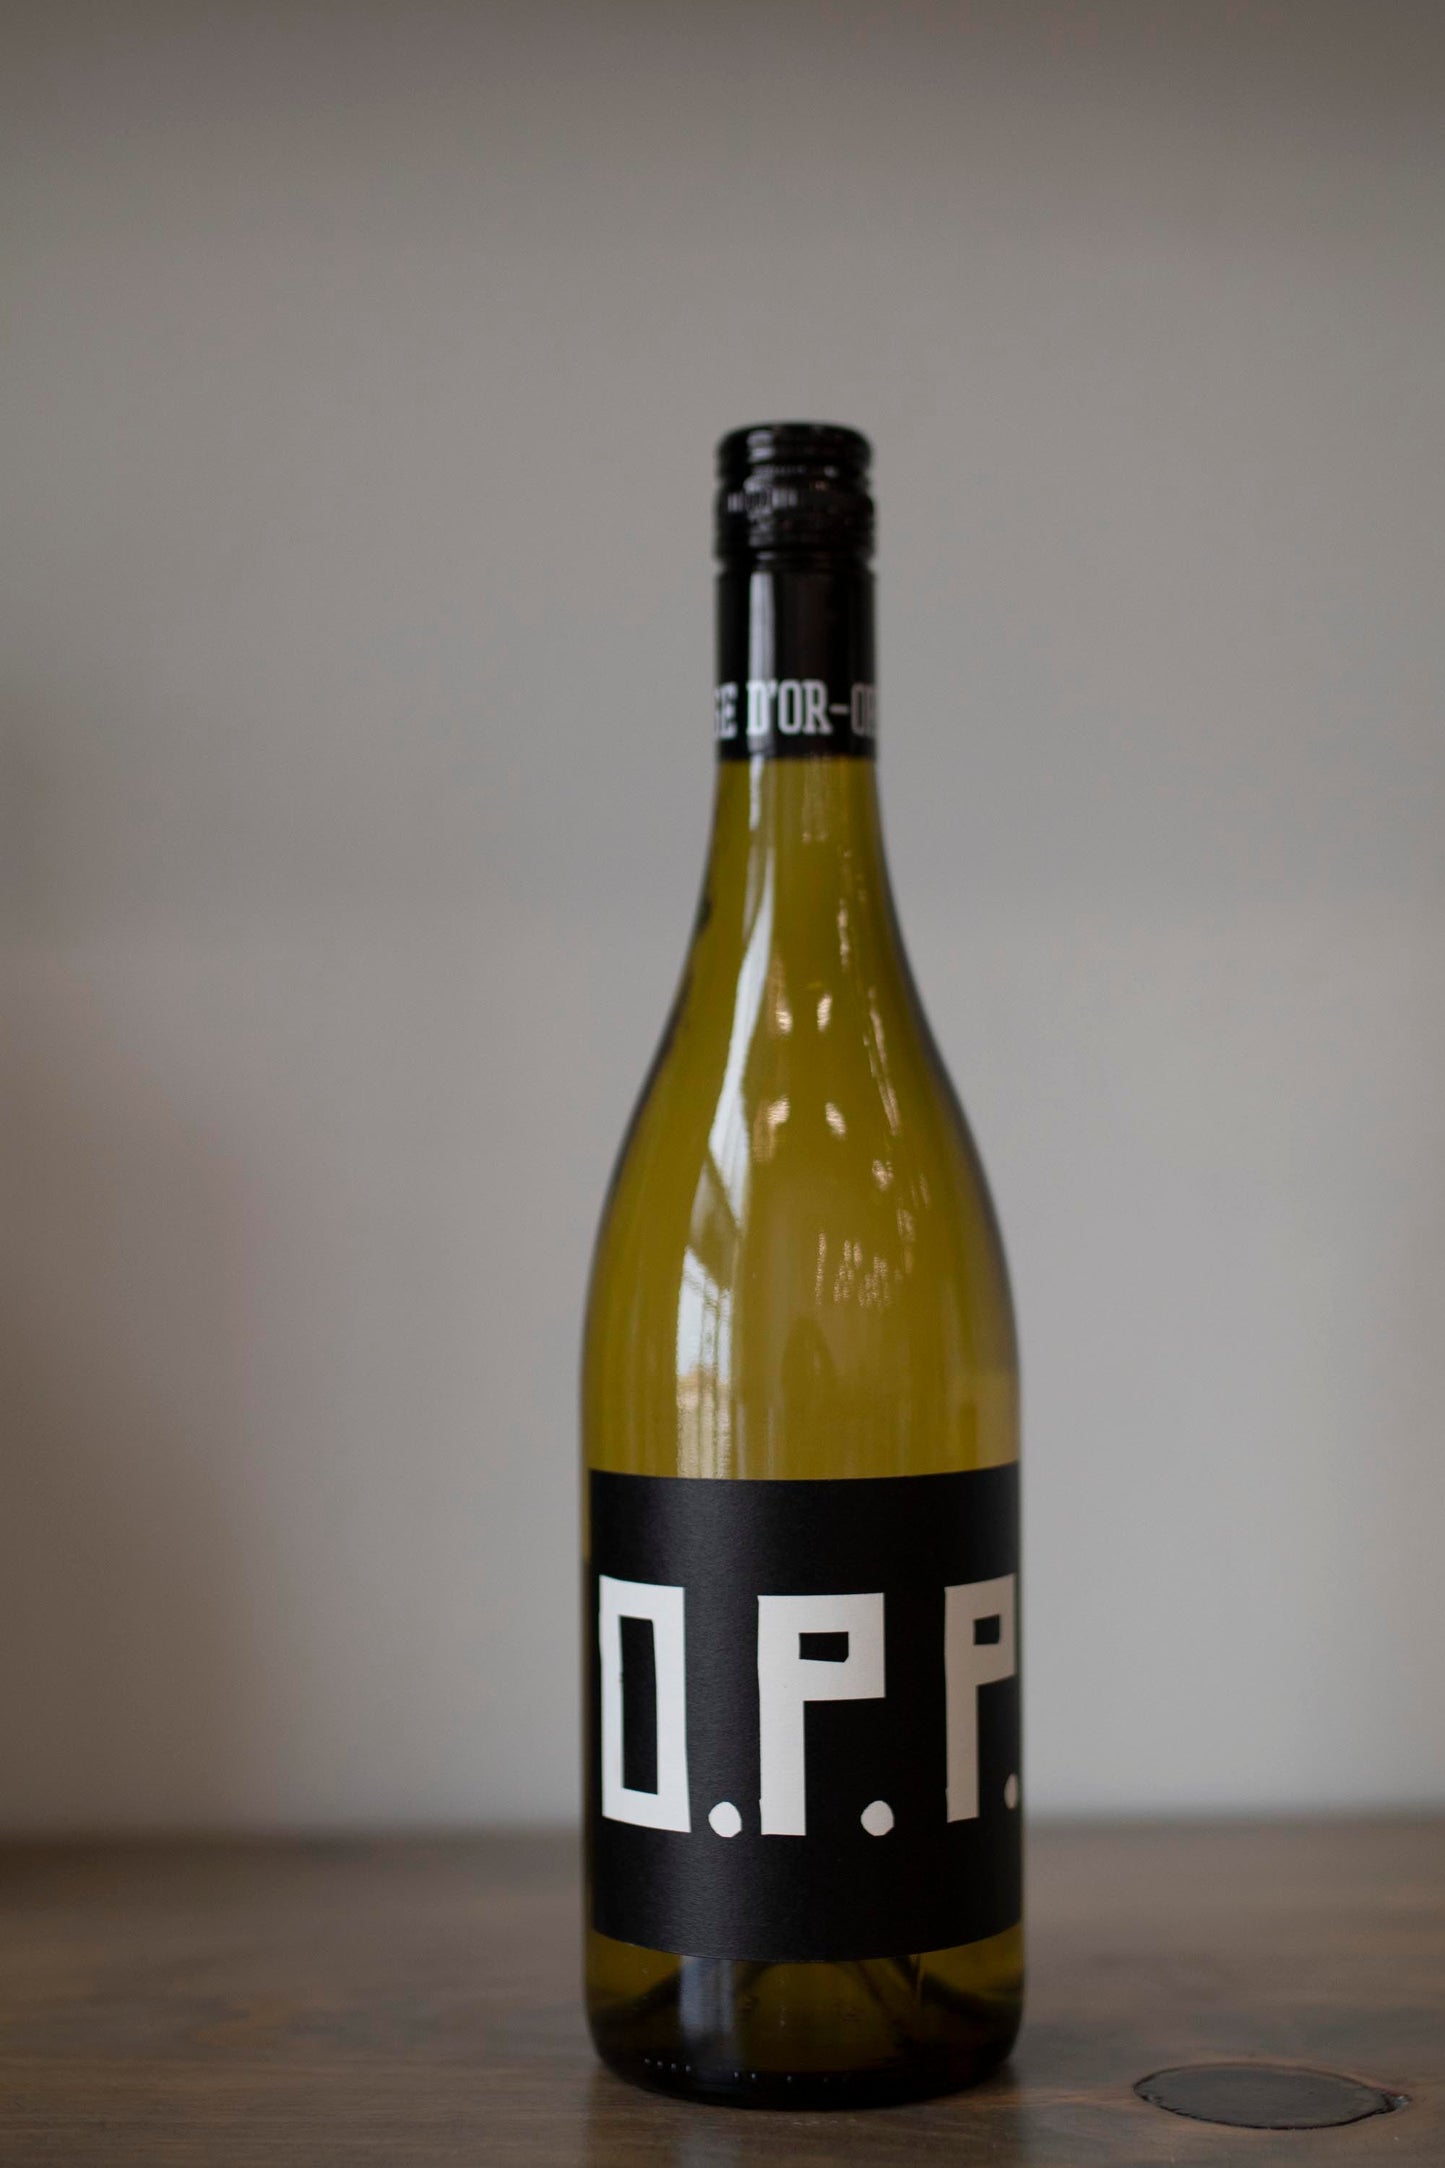 Bottle of 0.P.P. Pinot Gris Willamette found at Vine & Board in 3809 NW 166th St Suite 1, Edmond, OK 73012